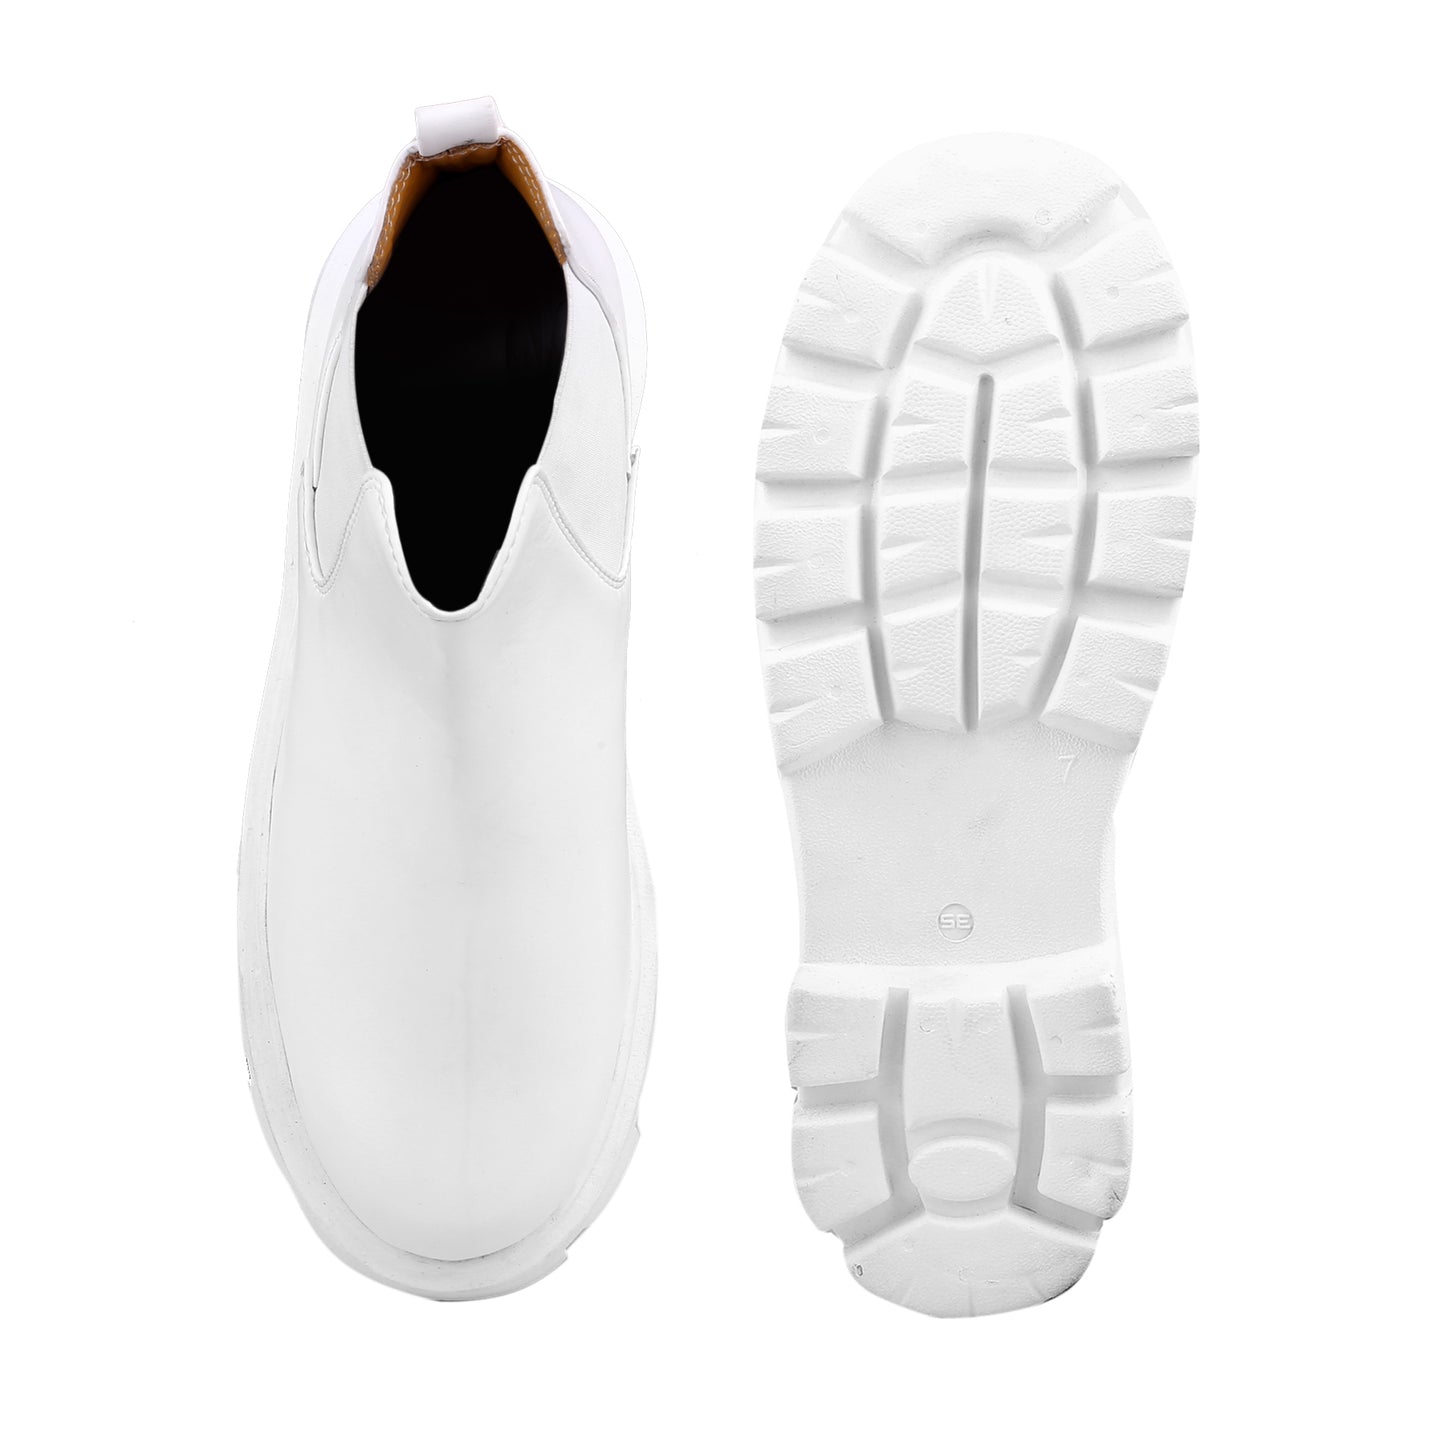 Men's White Pu Material Casual Chelsea and Ankle Boots